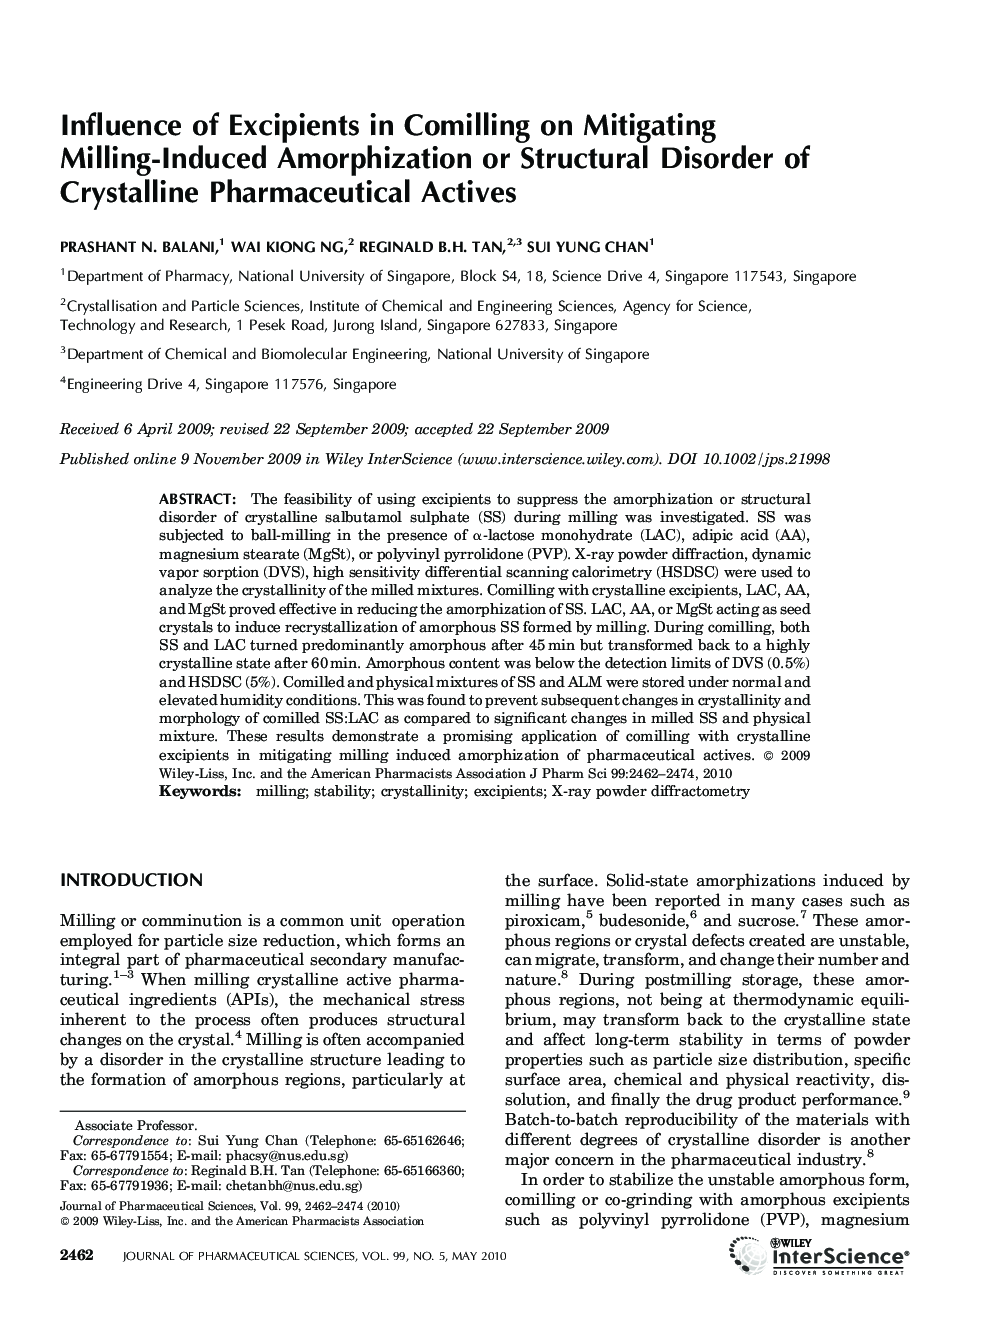 Influence of excipients in comilling on mitigating milling-induced amorphization or structural disorder of crystalline pharmaceutical actives